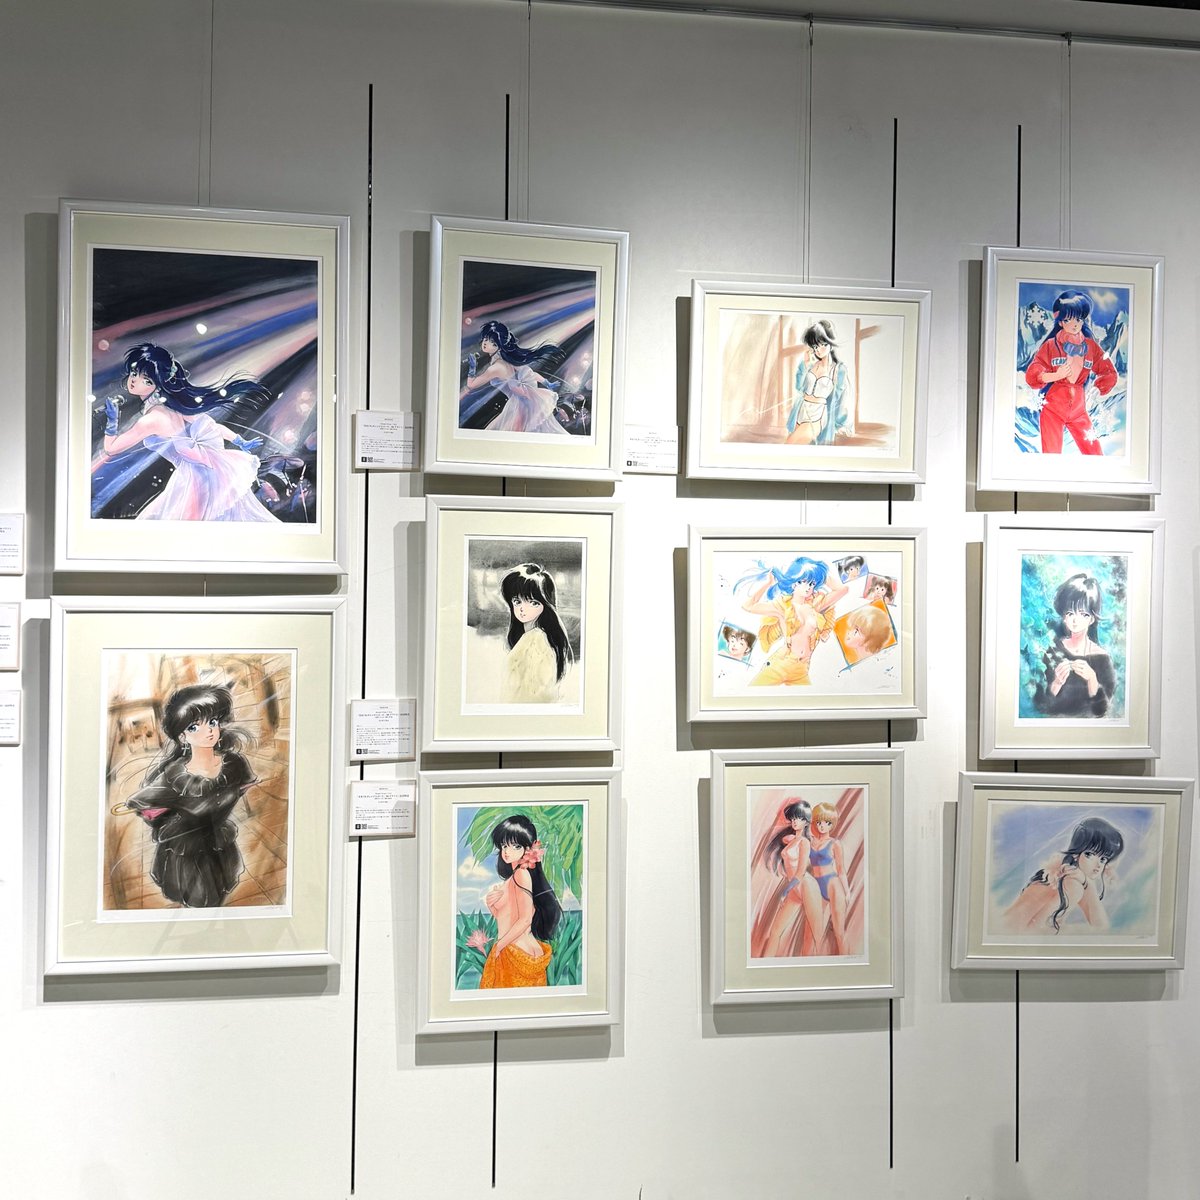 At the ongoing Kimagure Orange ☆ Road 40th Anniversary Exhibition, not only are there new 88Graph, but all previously released 88Graph pieces are on display as well! We really wanted to give them more space, but due to venue limitations, this is how it turned out. Still, it’s a